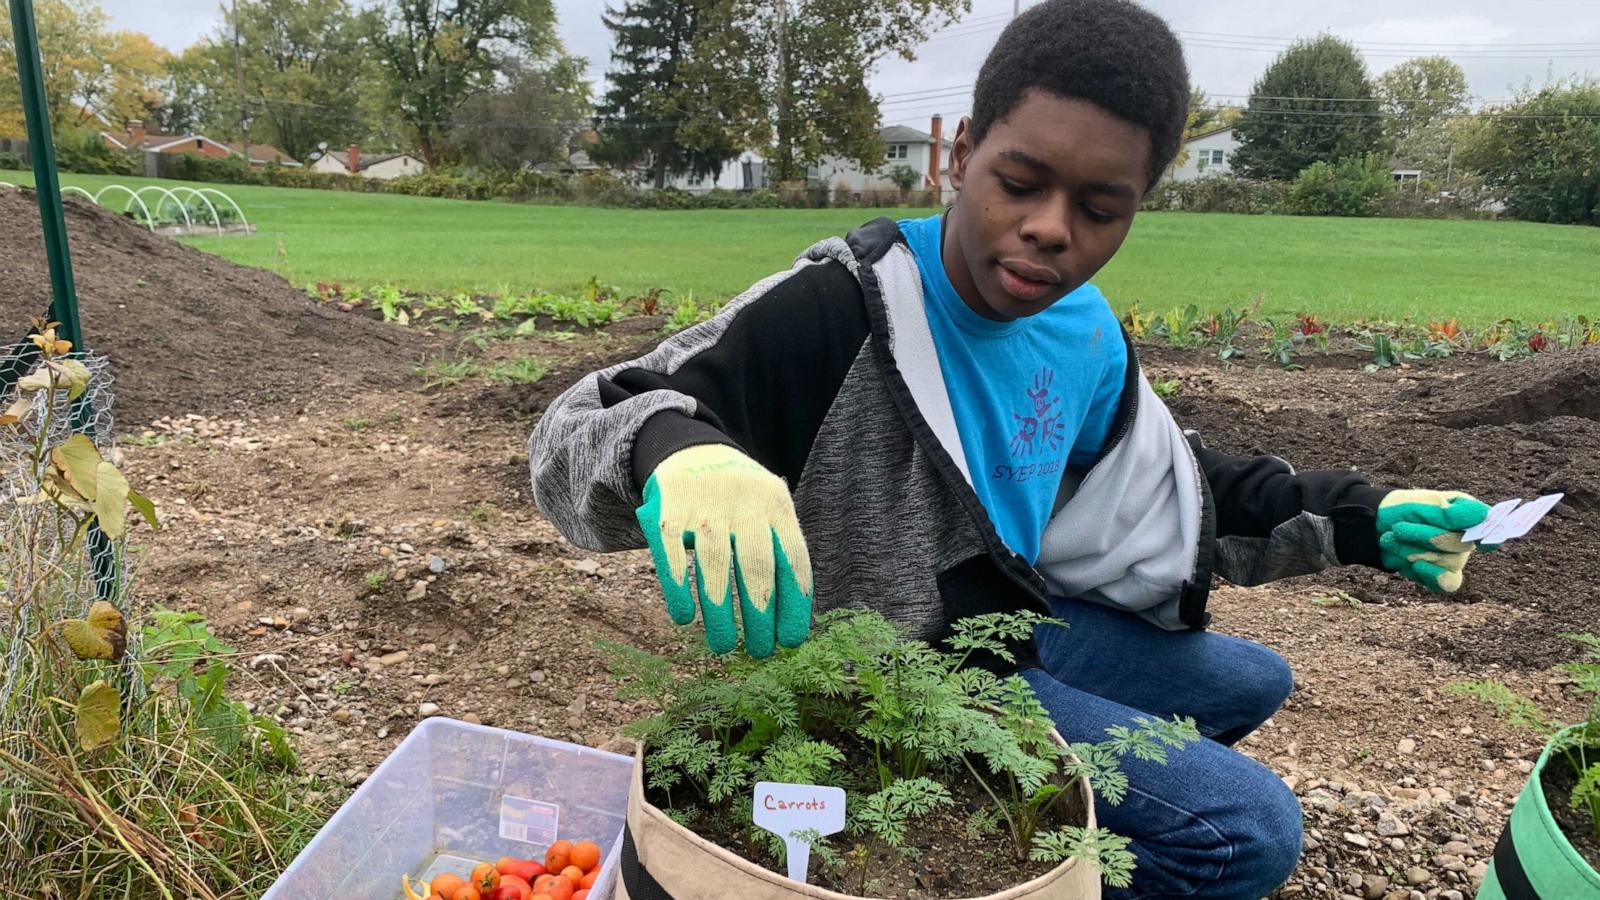 PHOTO: Te'Lario Watkins II tends to carrots in a vegetable garden for his nonprofit, The Garden Club Project.